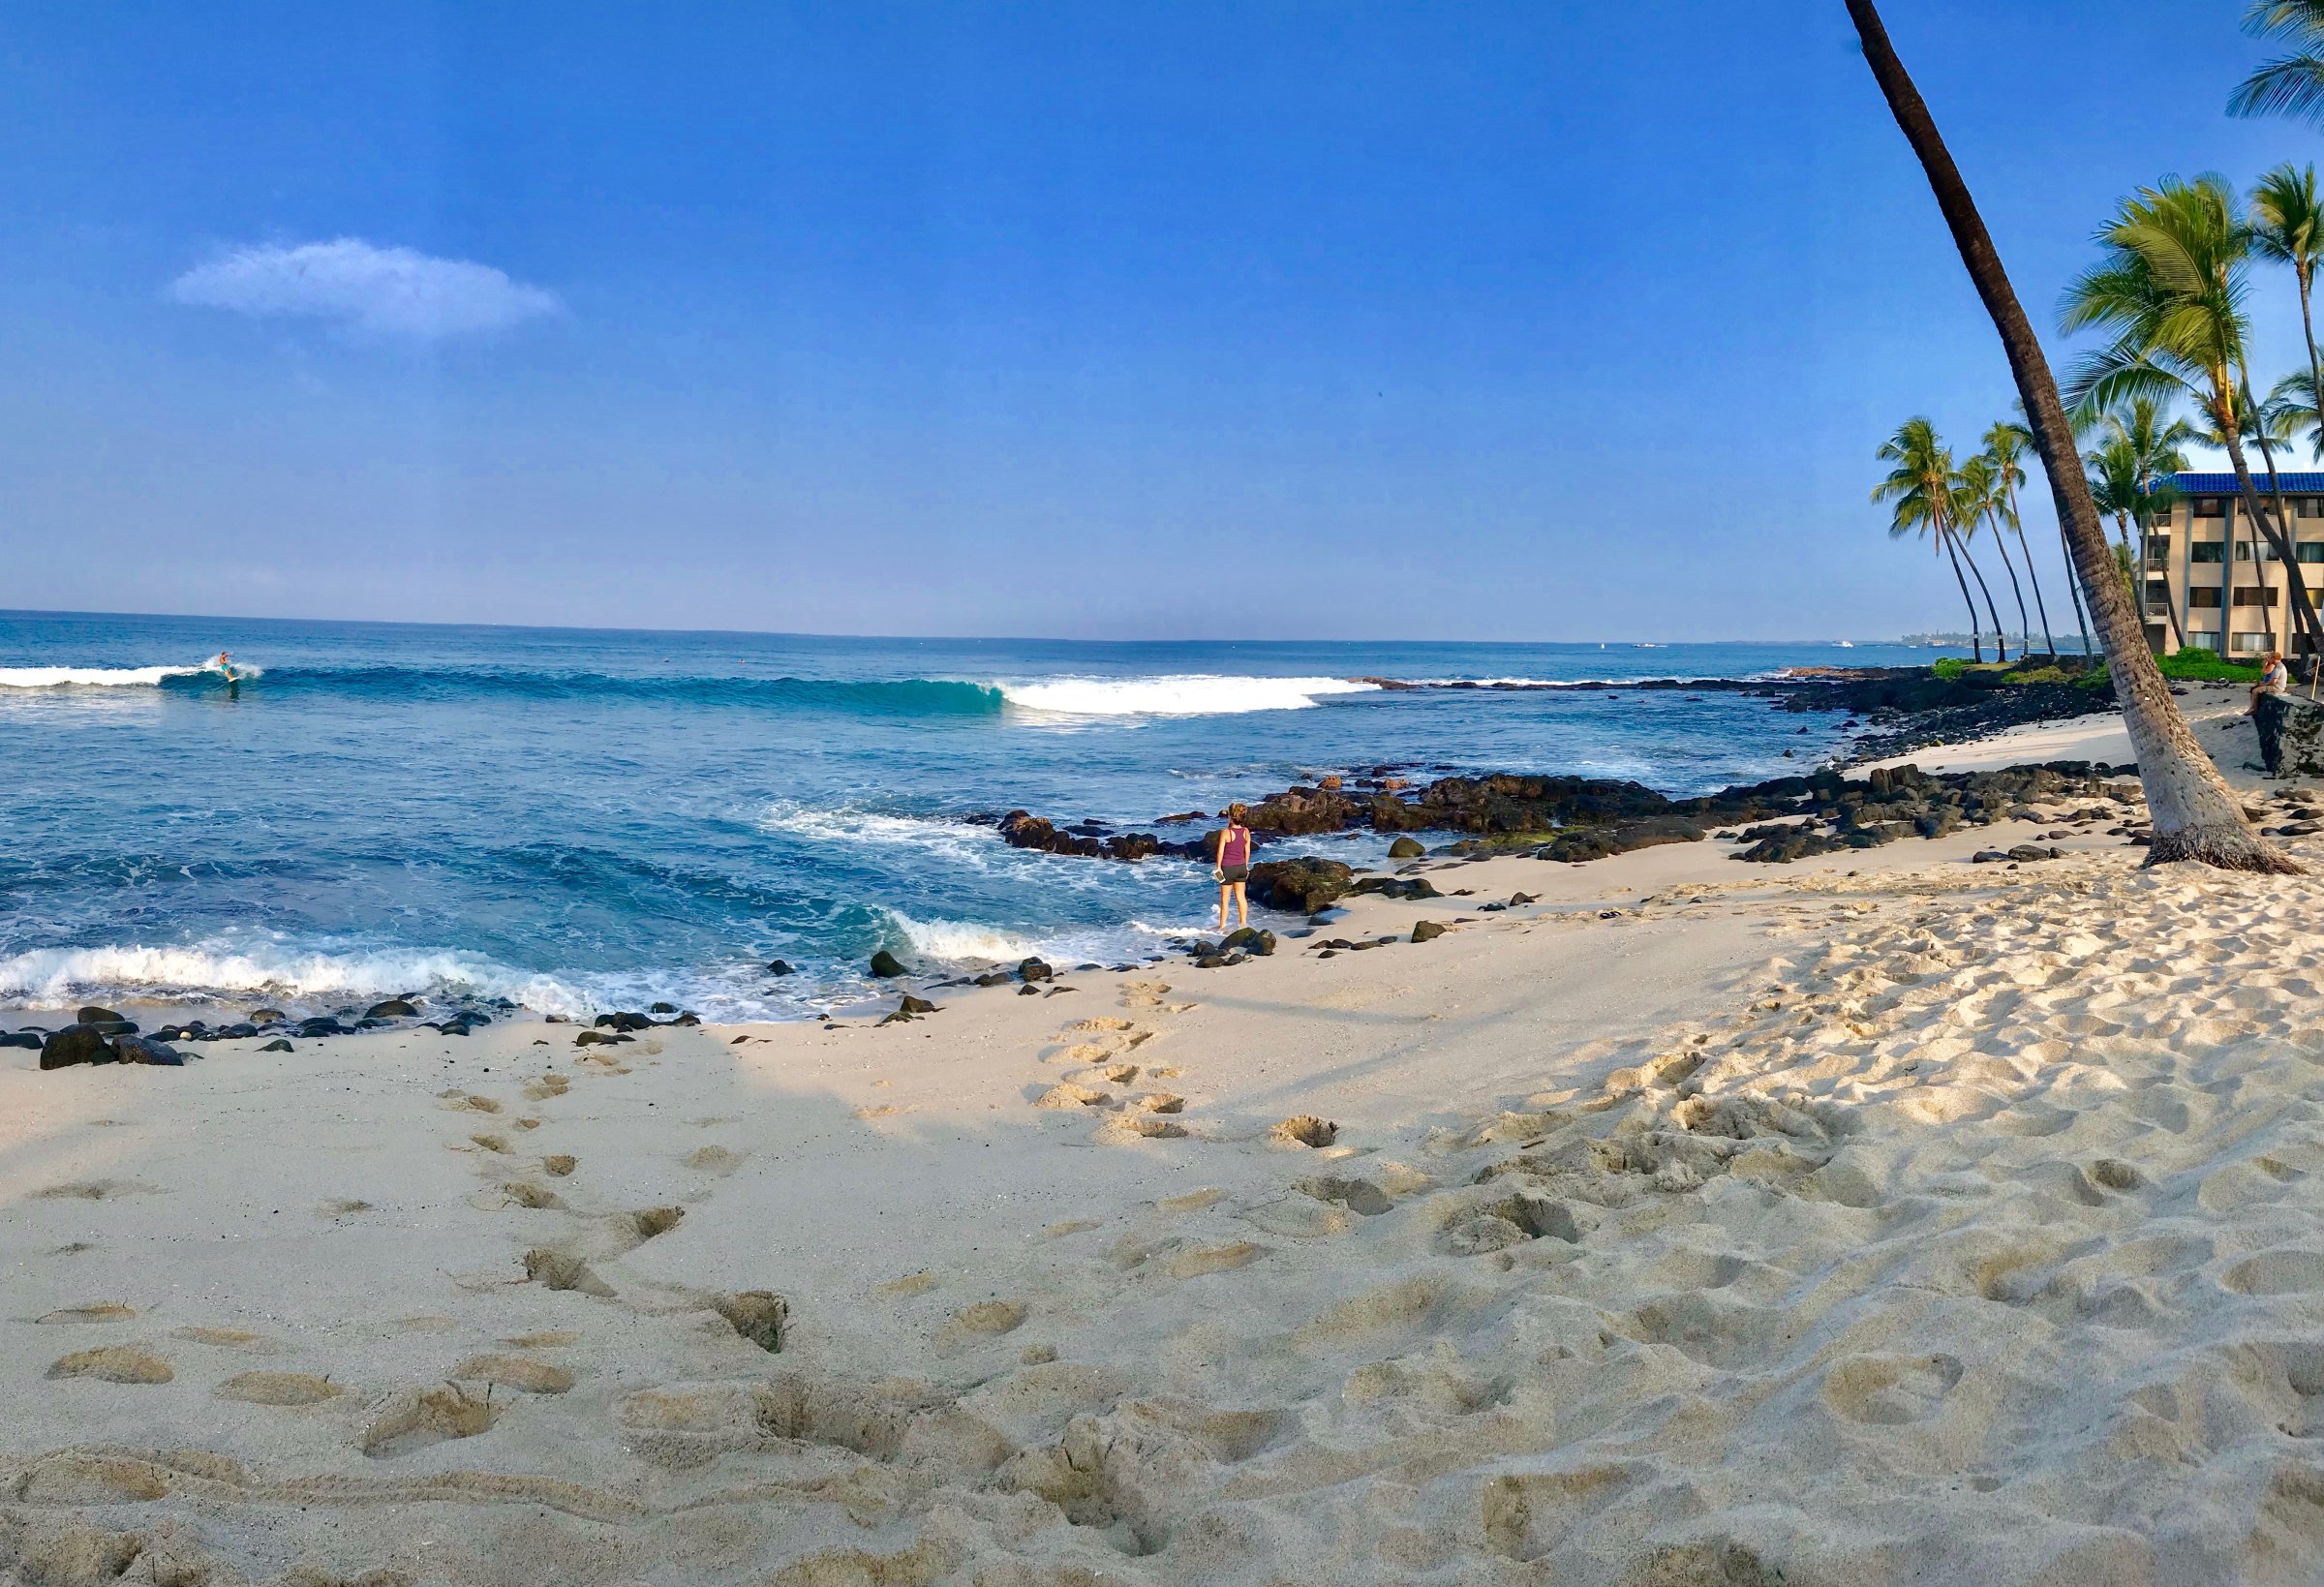 The Kona shore is mostly empty with only one surfer in the bright blue ocean.